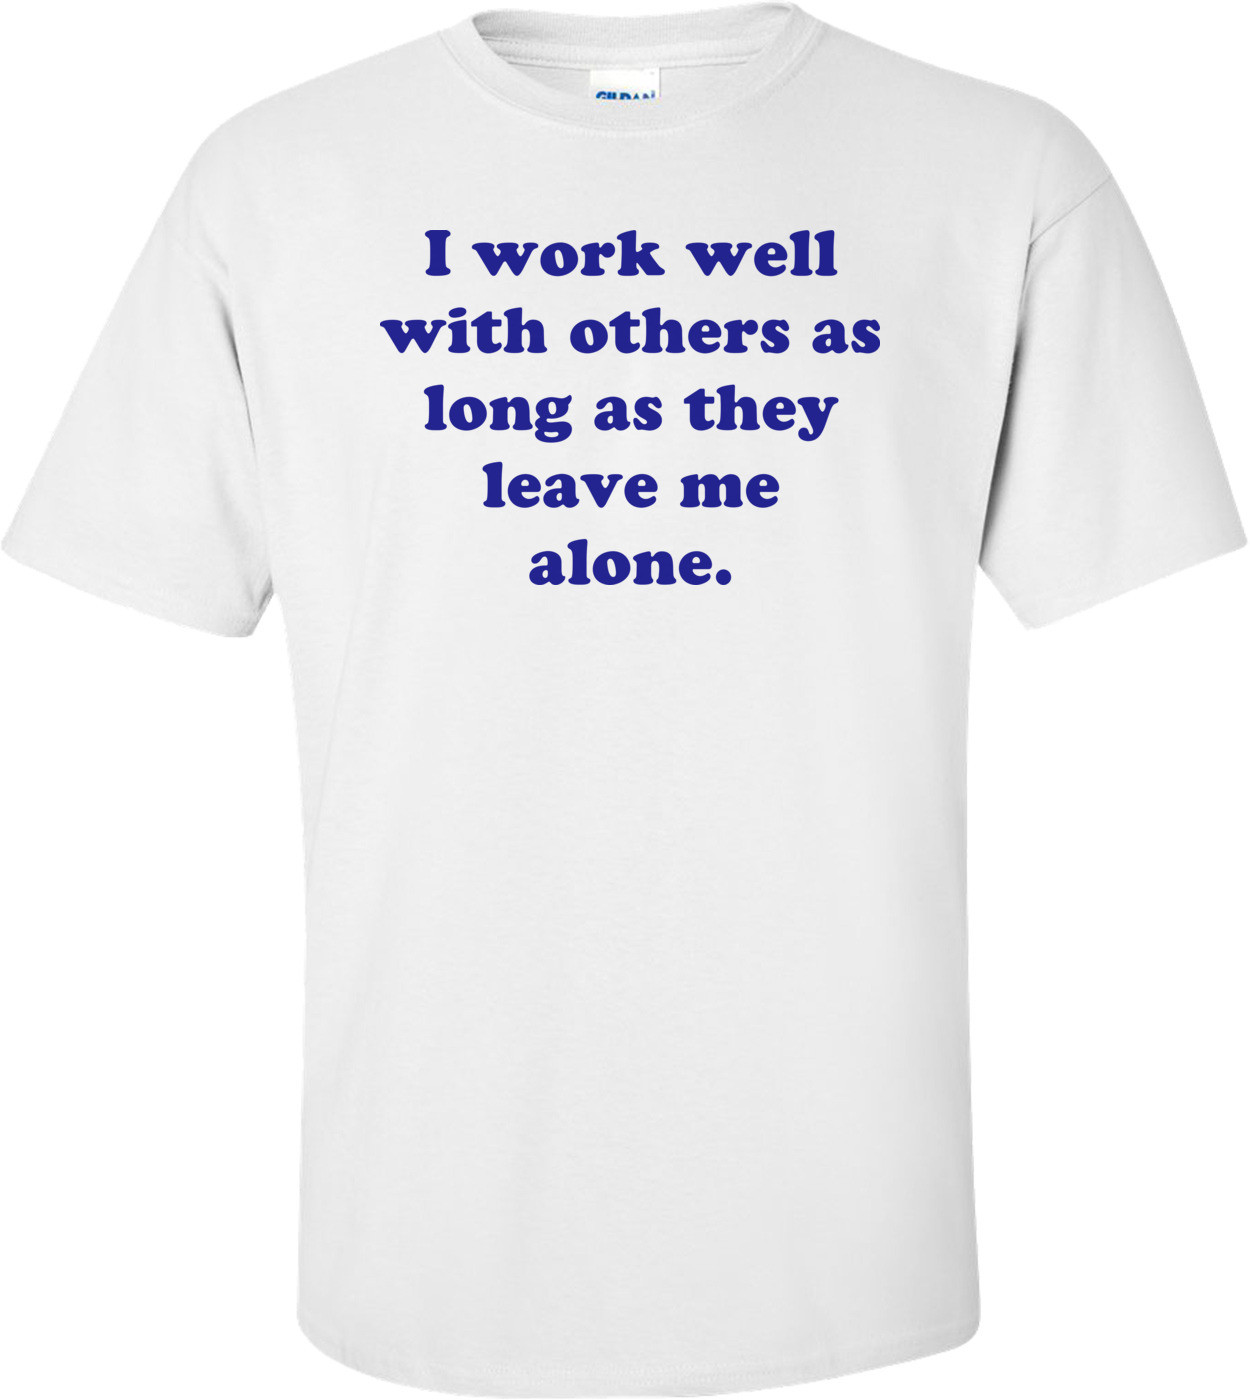 I Work Well With Others As Long As They Leave Me Alone. Shirt